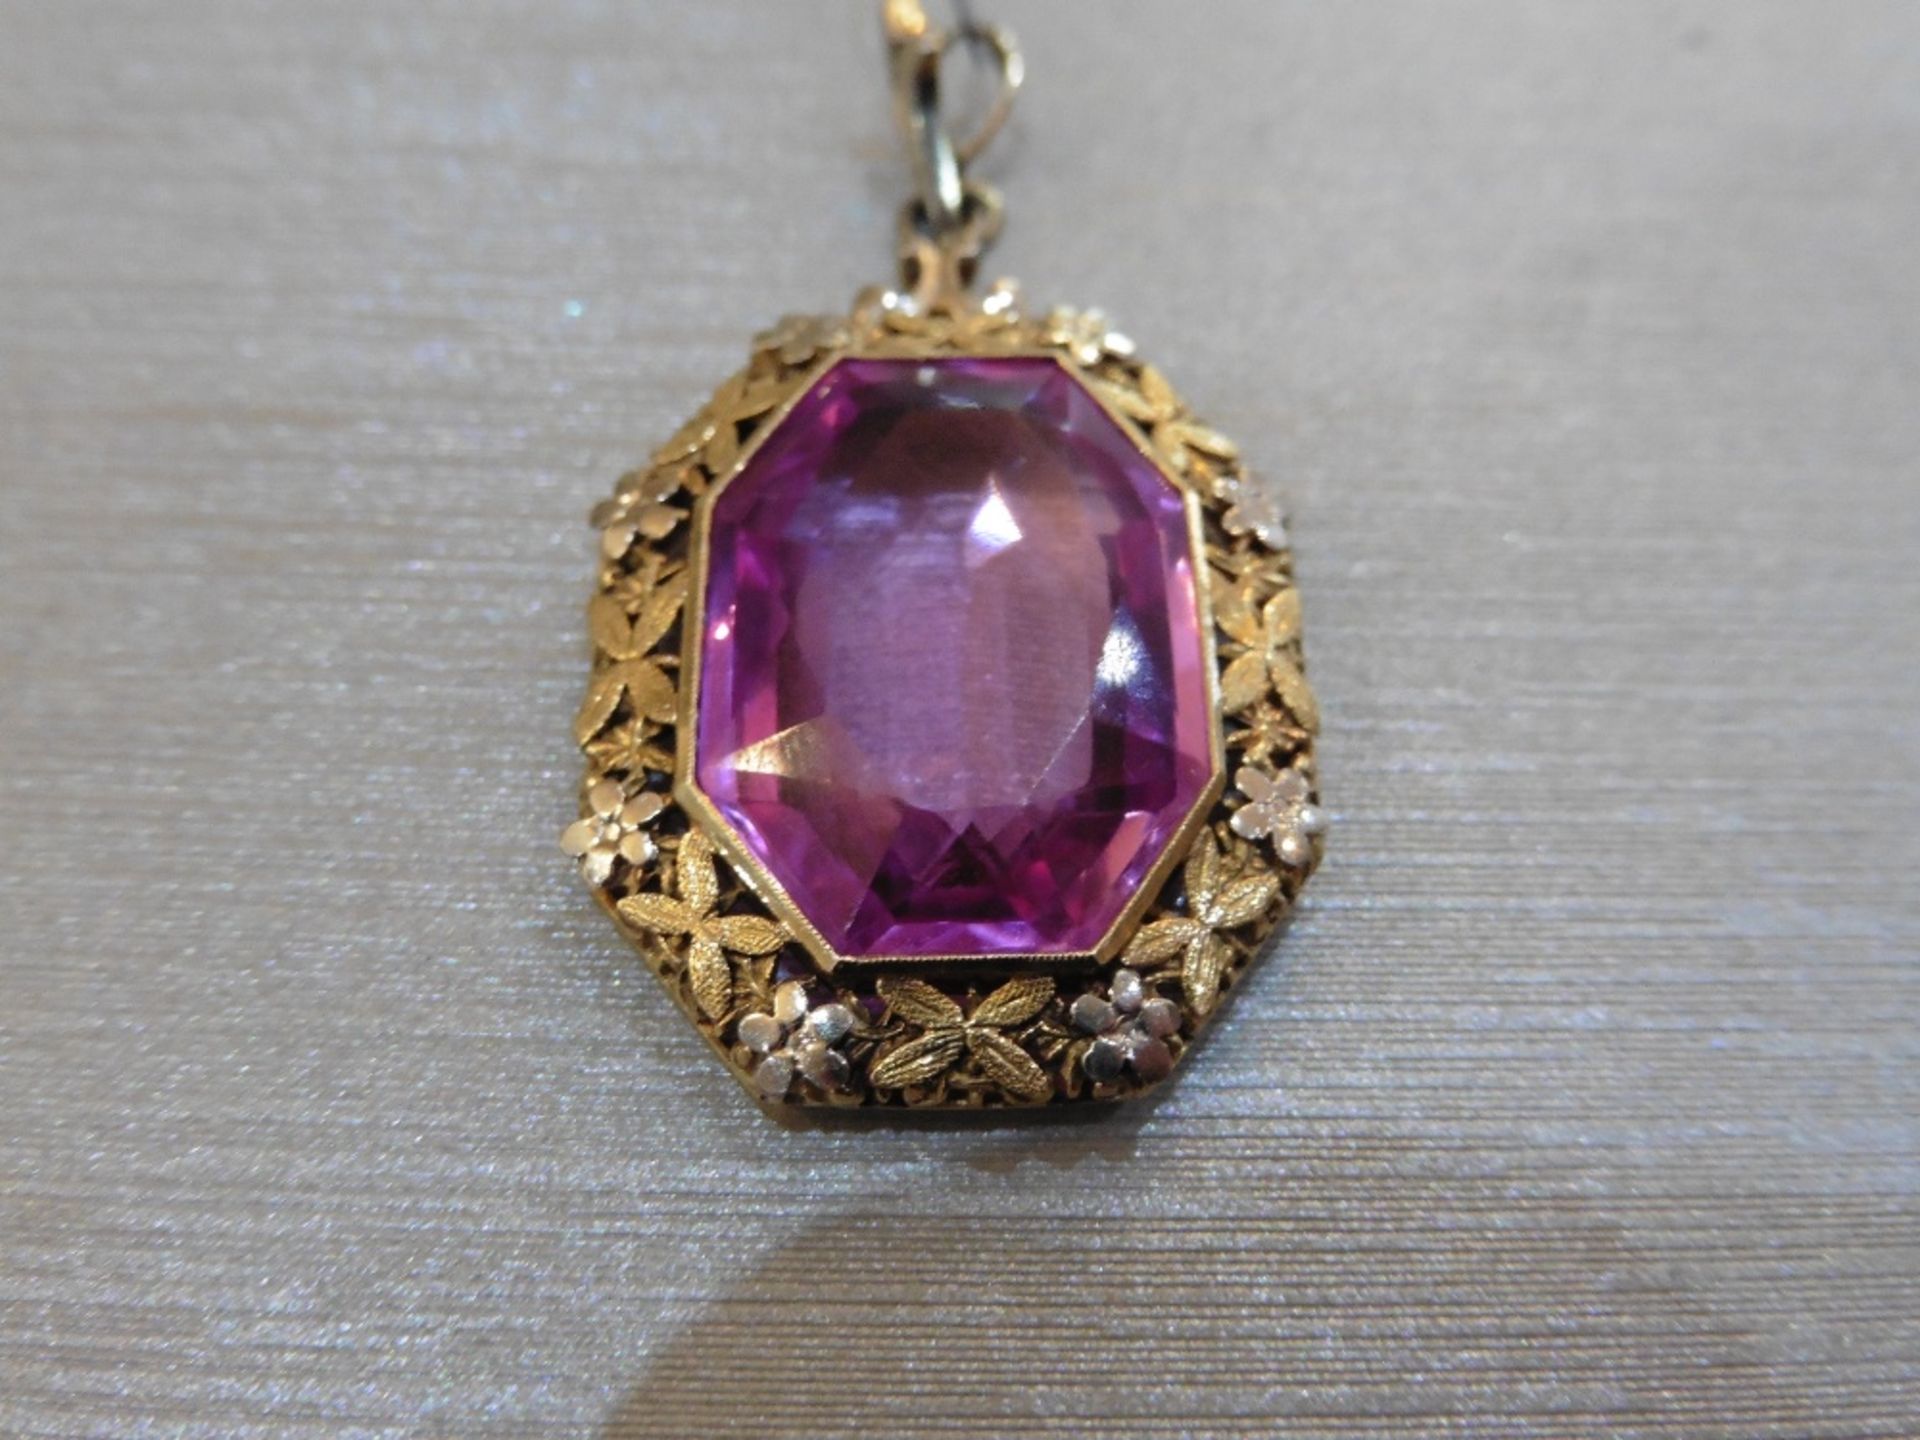 Pre-owned 14ct yellow gold pink amethyst pendant set with a stunning coloured stone with a floral